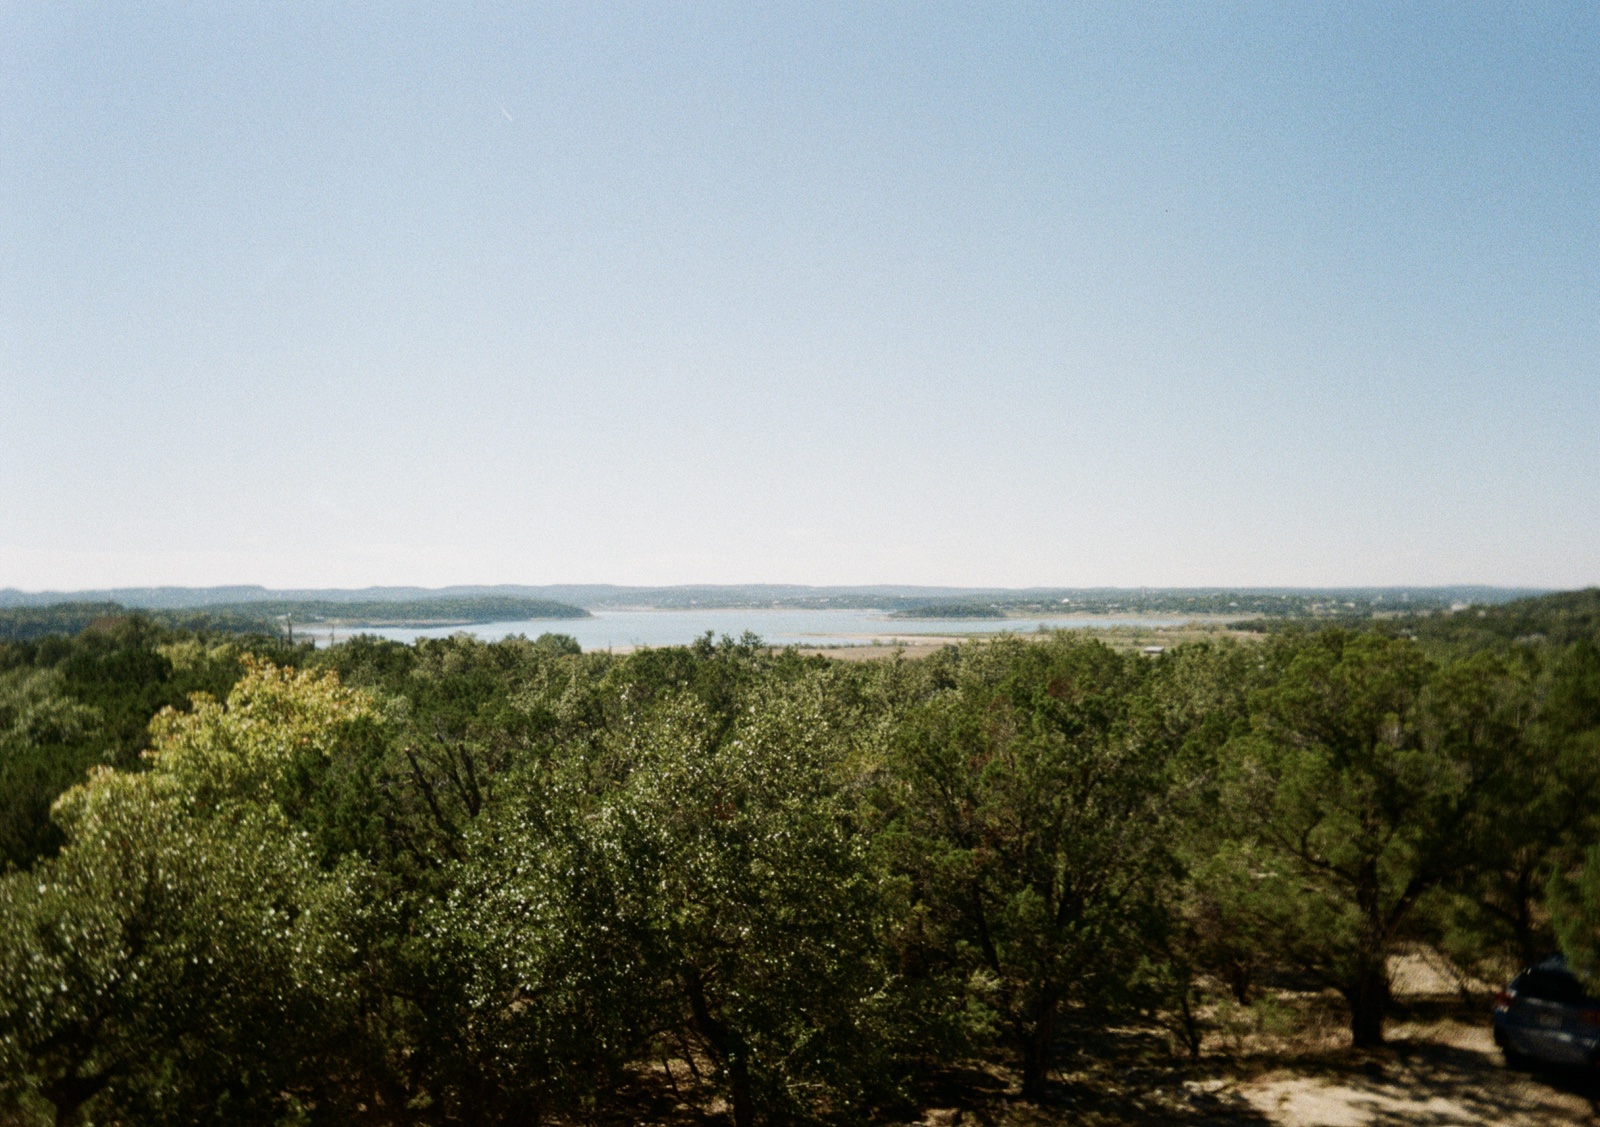 Canyon Lake in the distance, with some trees and greenery in the foreground